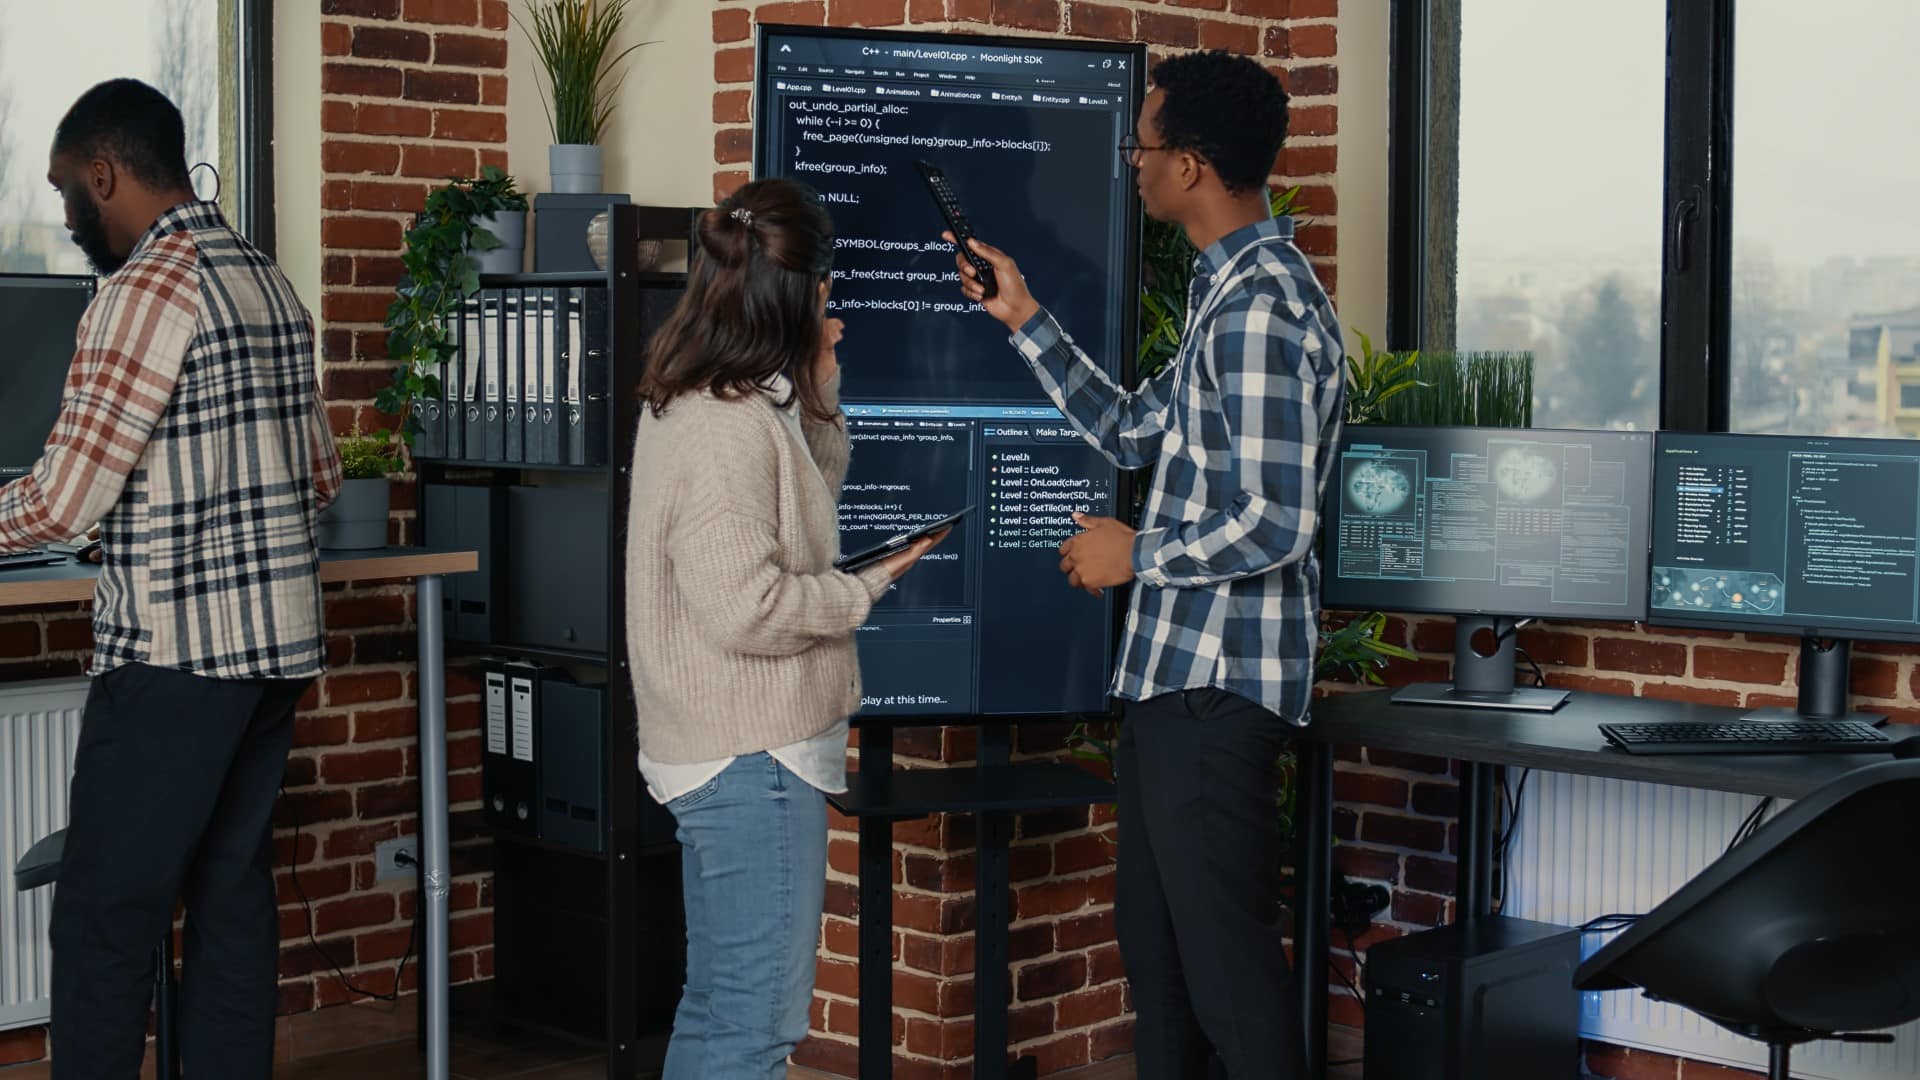 Three people are in an office with exposed brick walls. Two examine code on a large monitor, while the third person uses a computer, possibly exploring tender opportunities. Various office equipment and plants add to the productive atmosphere.